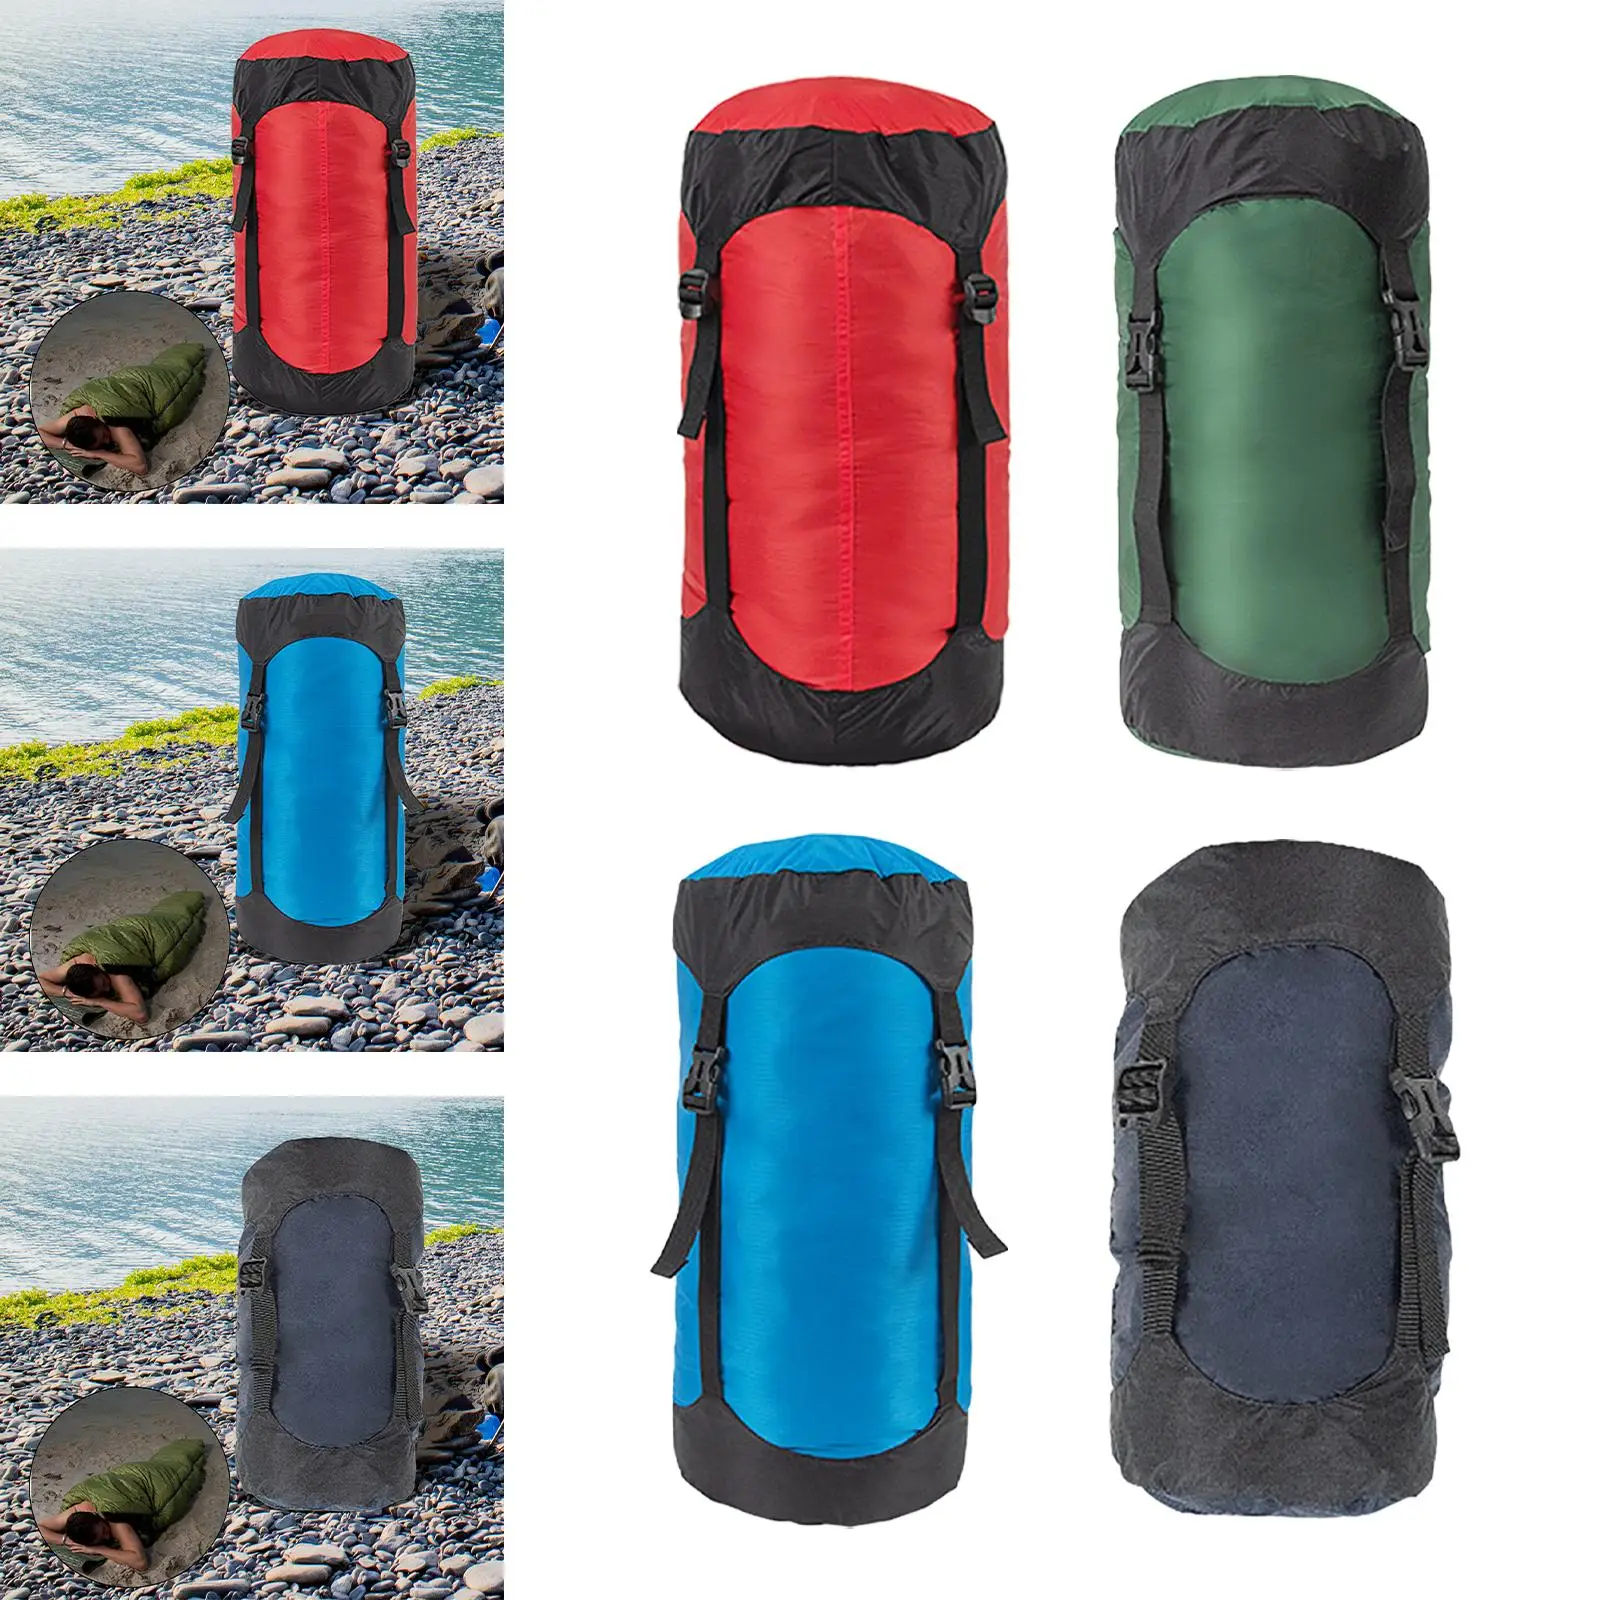 Portable Compression Sack for Sleeping Bag Clothes Drysack Outdoor Ditty Bag